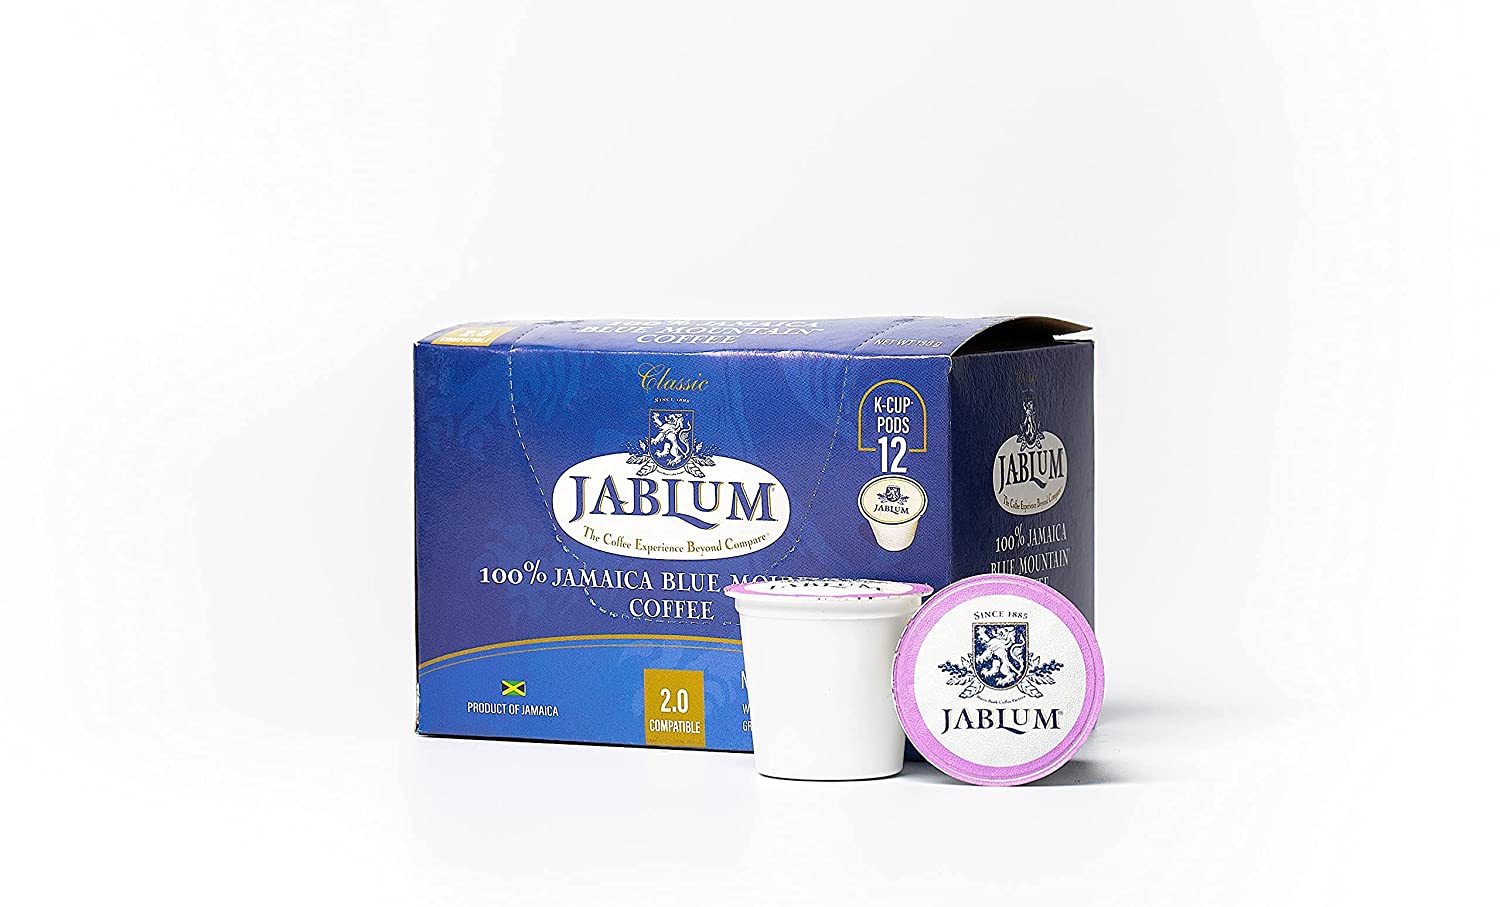 Jablum Jamaica Blue Mountain Single Serve Coffee Pods for K Cup Brewers 2.0, 12 Count